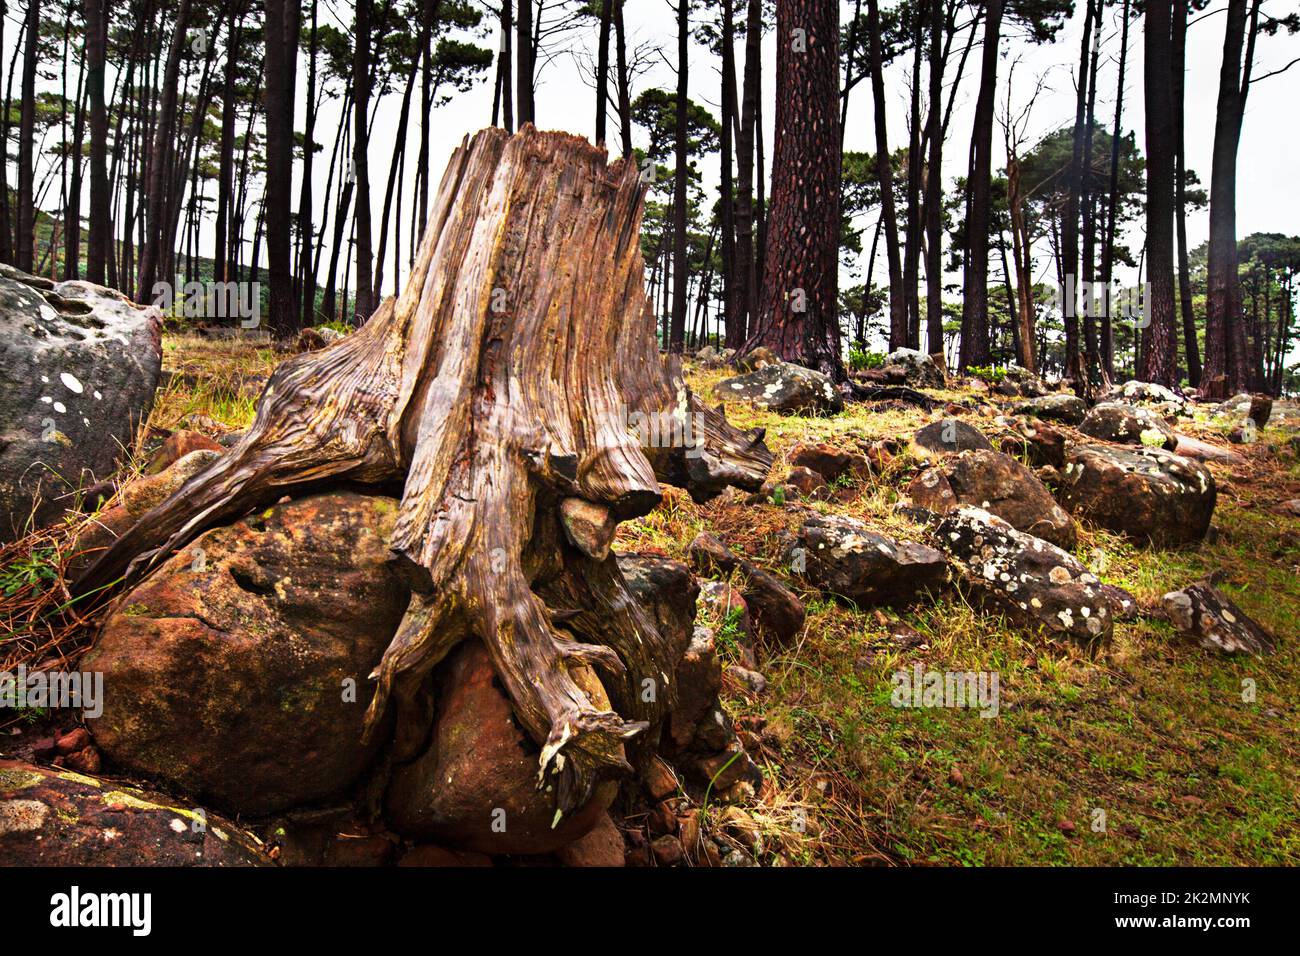 Providing the wood for your fireplaces this winter. Shot of a cut down tree in the forest. Stock Photo